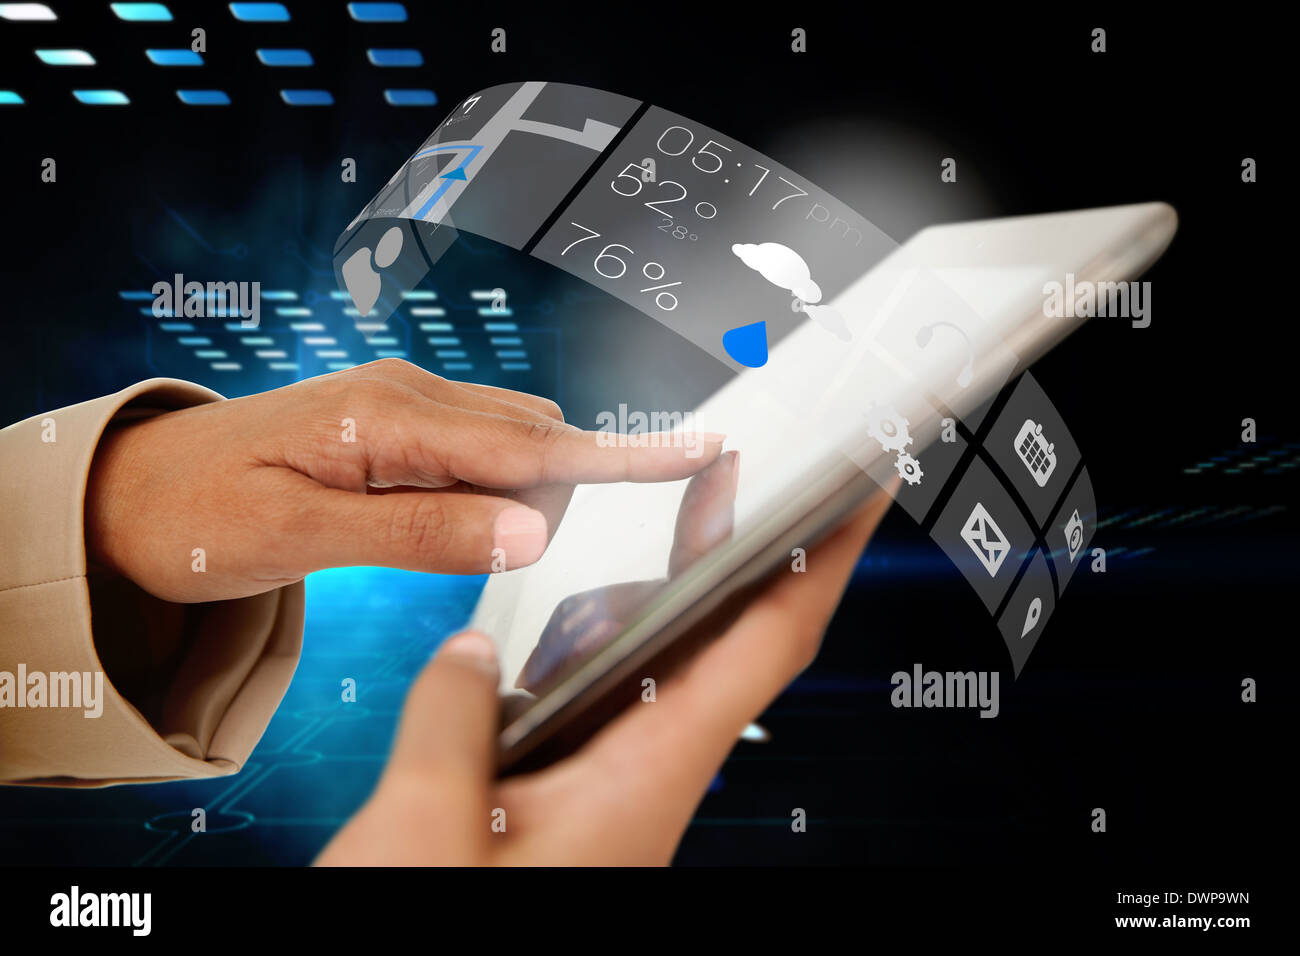 Businesswoman touching tablet with app interface Stock Photo